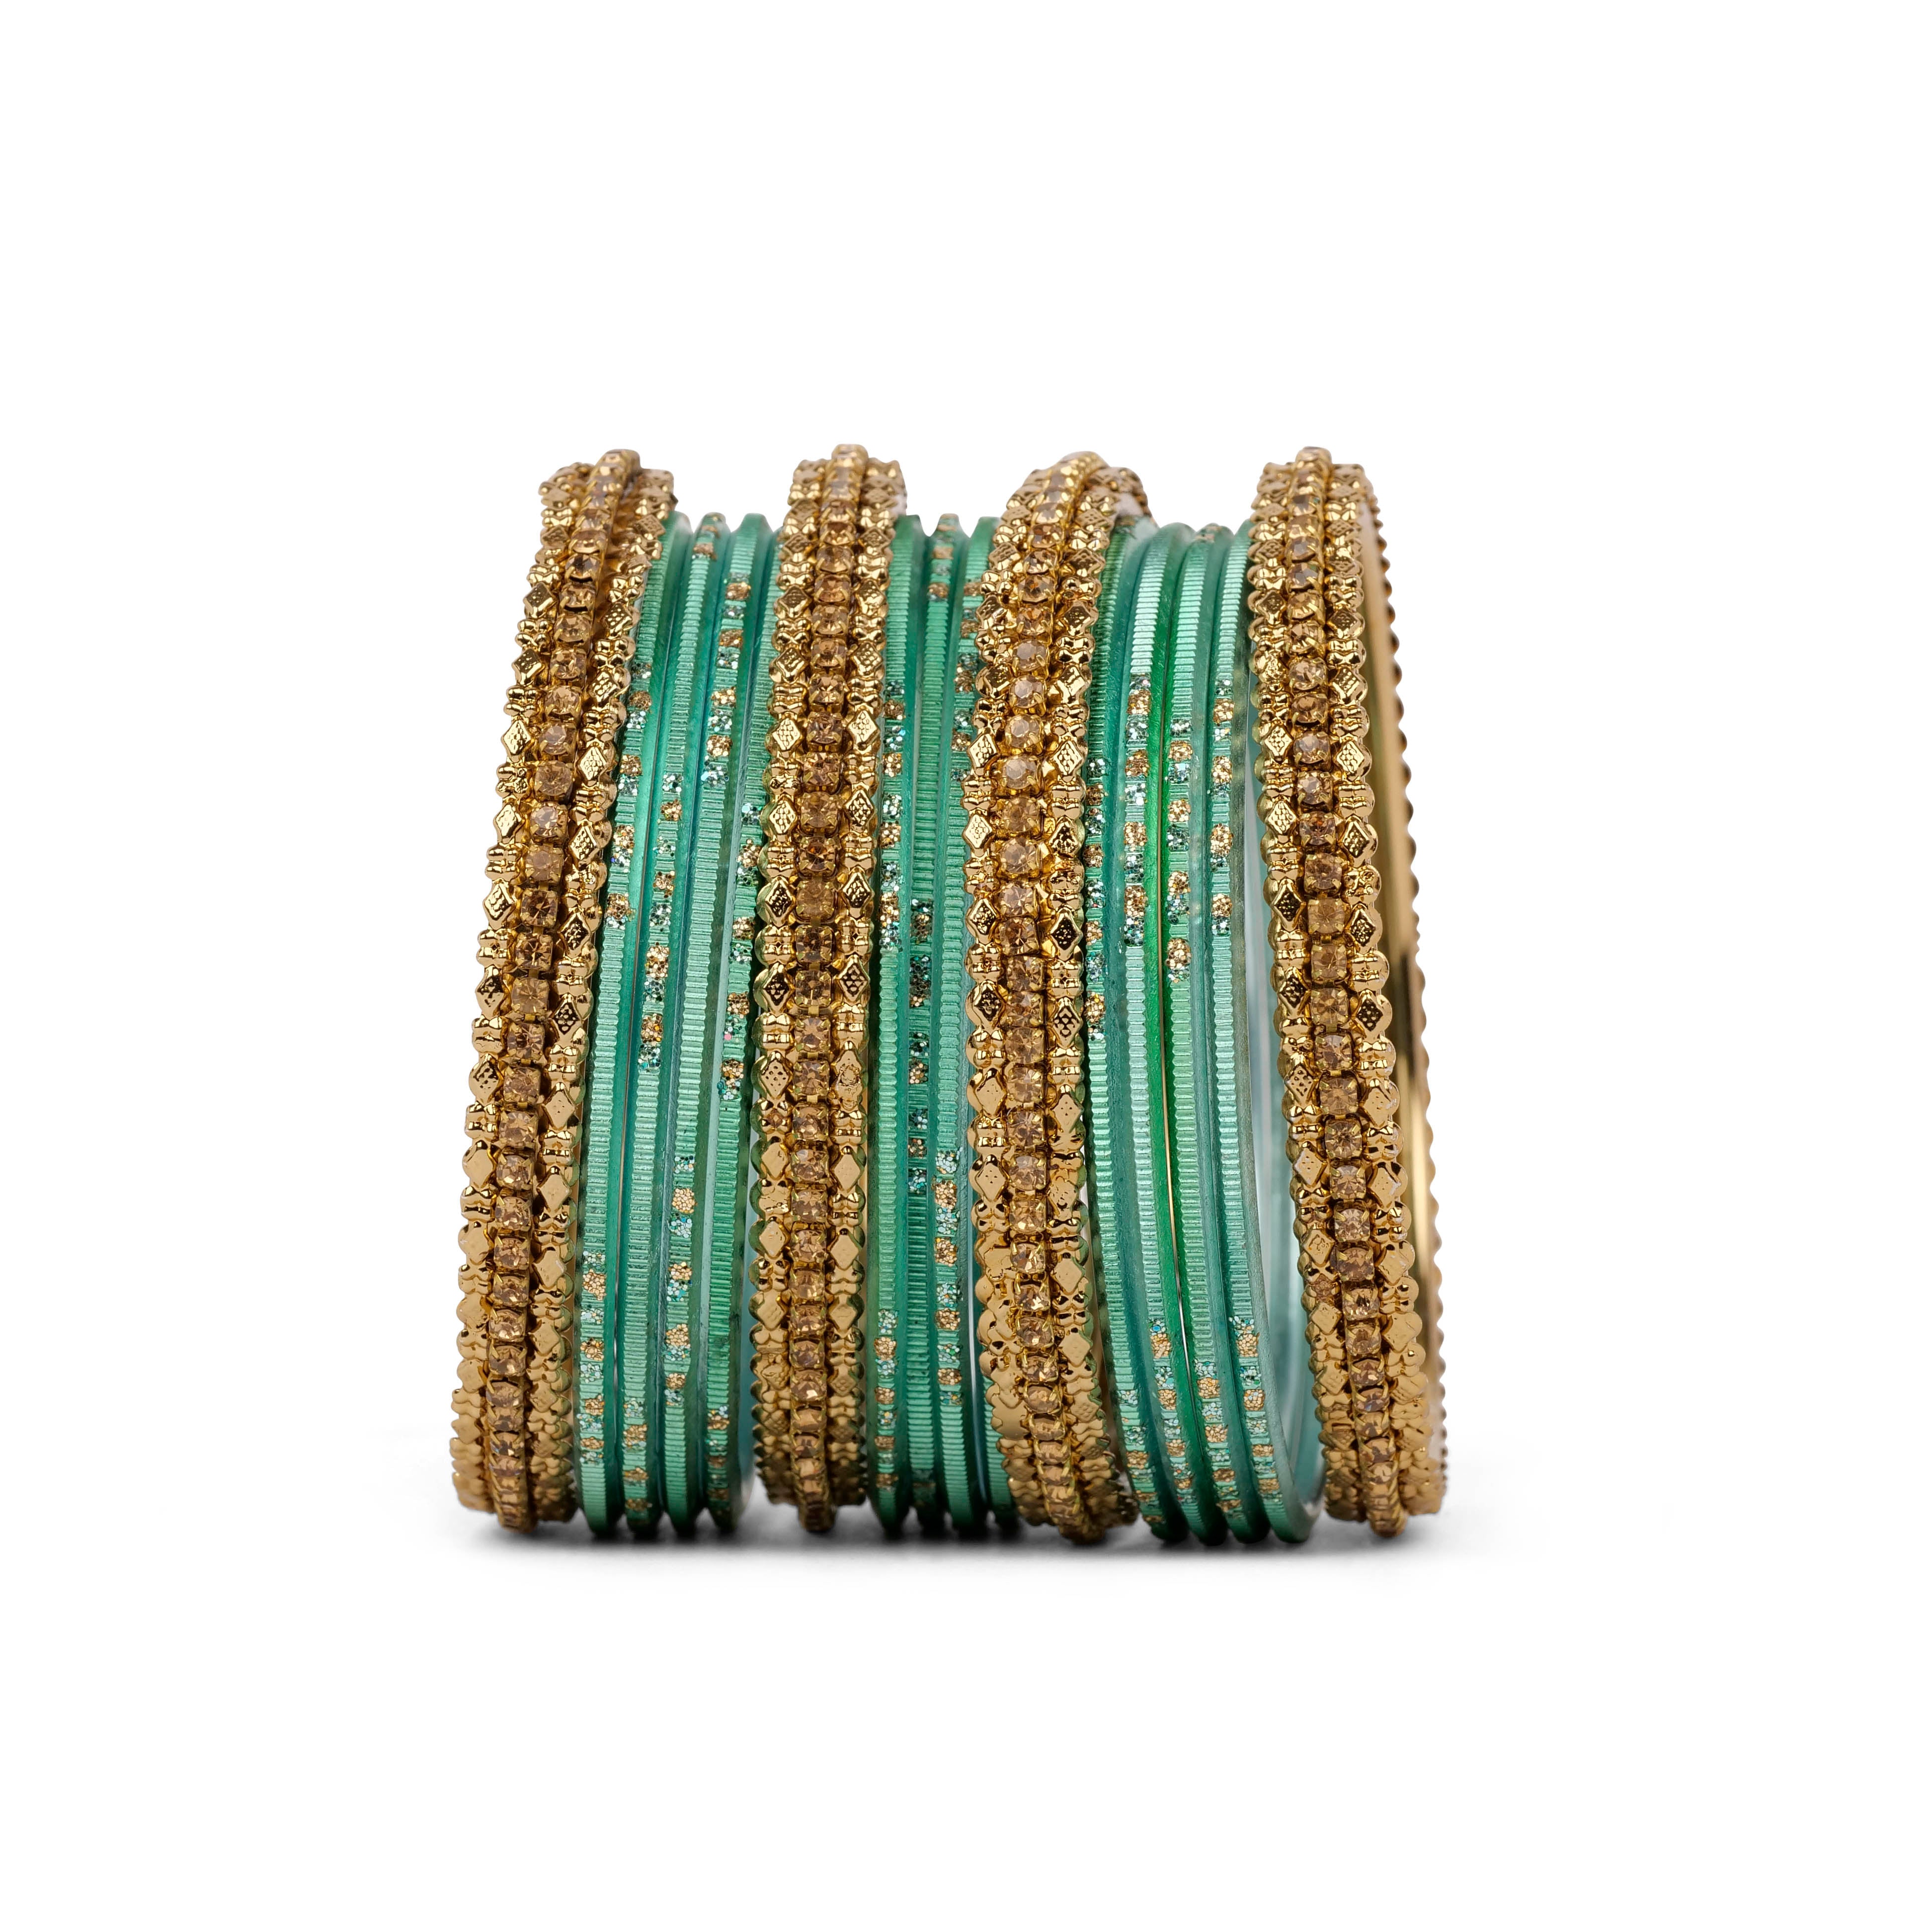 Simple Bangle Set in Teal and Antique Gold